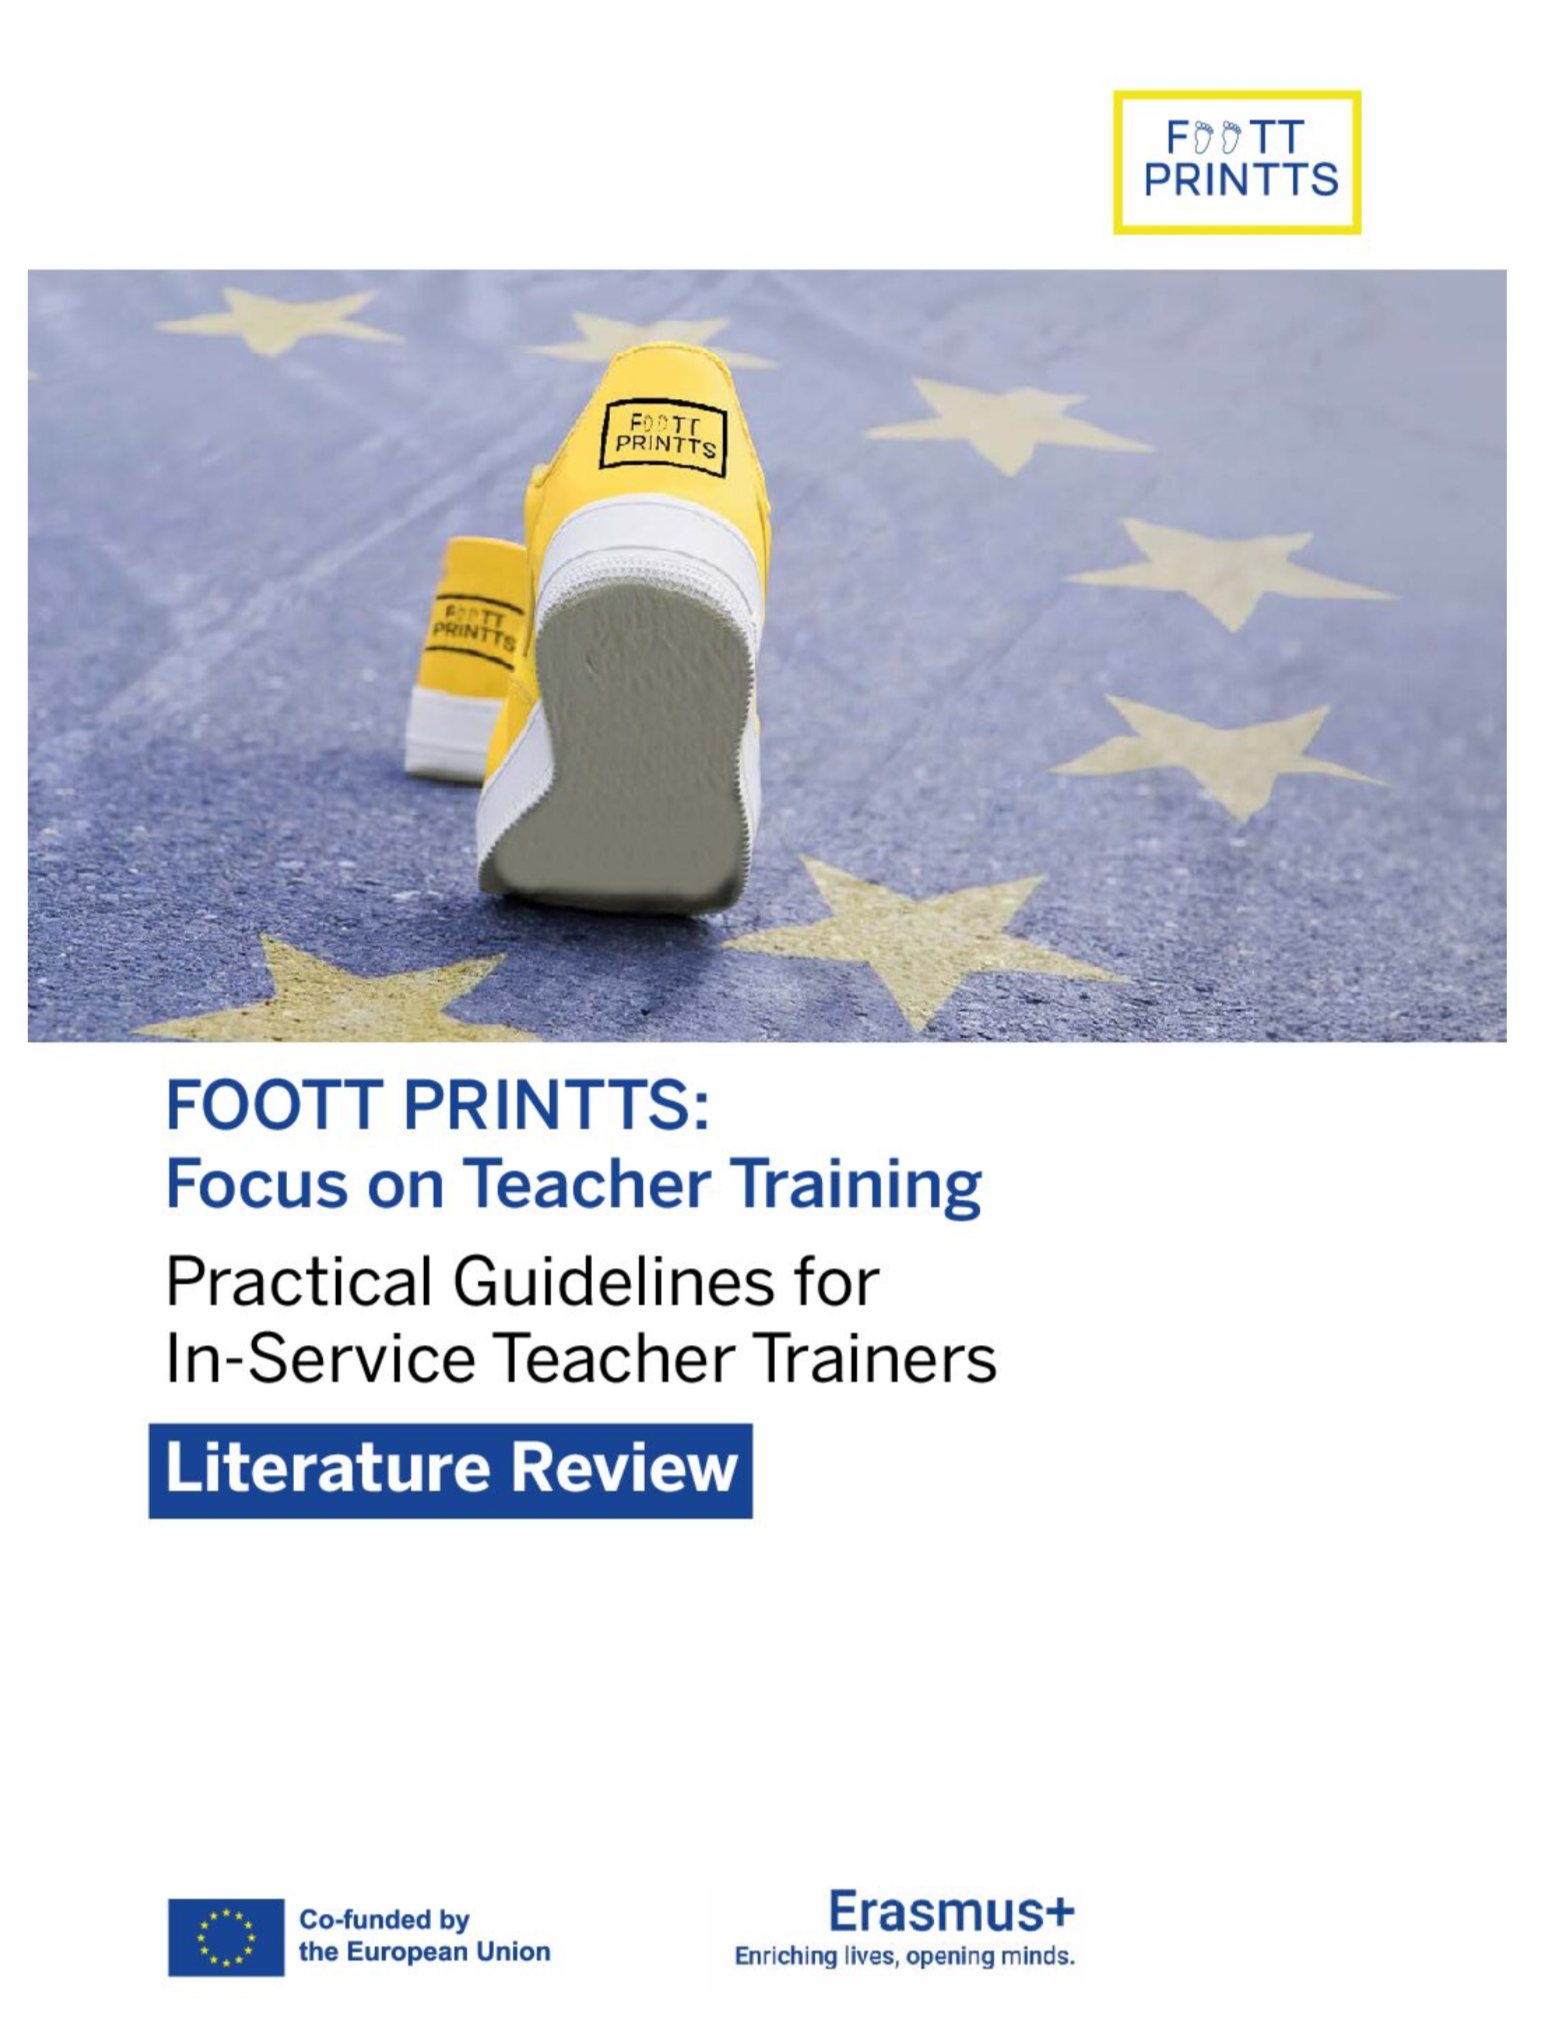 Introduction to the FOOTT PRINTTS Literature Review